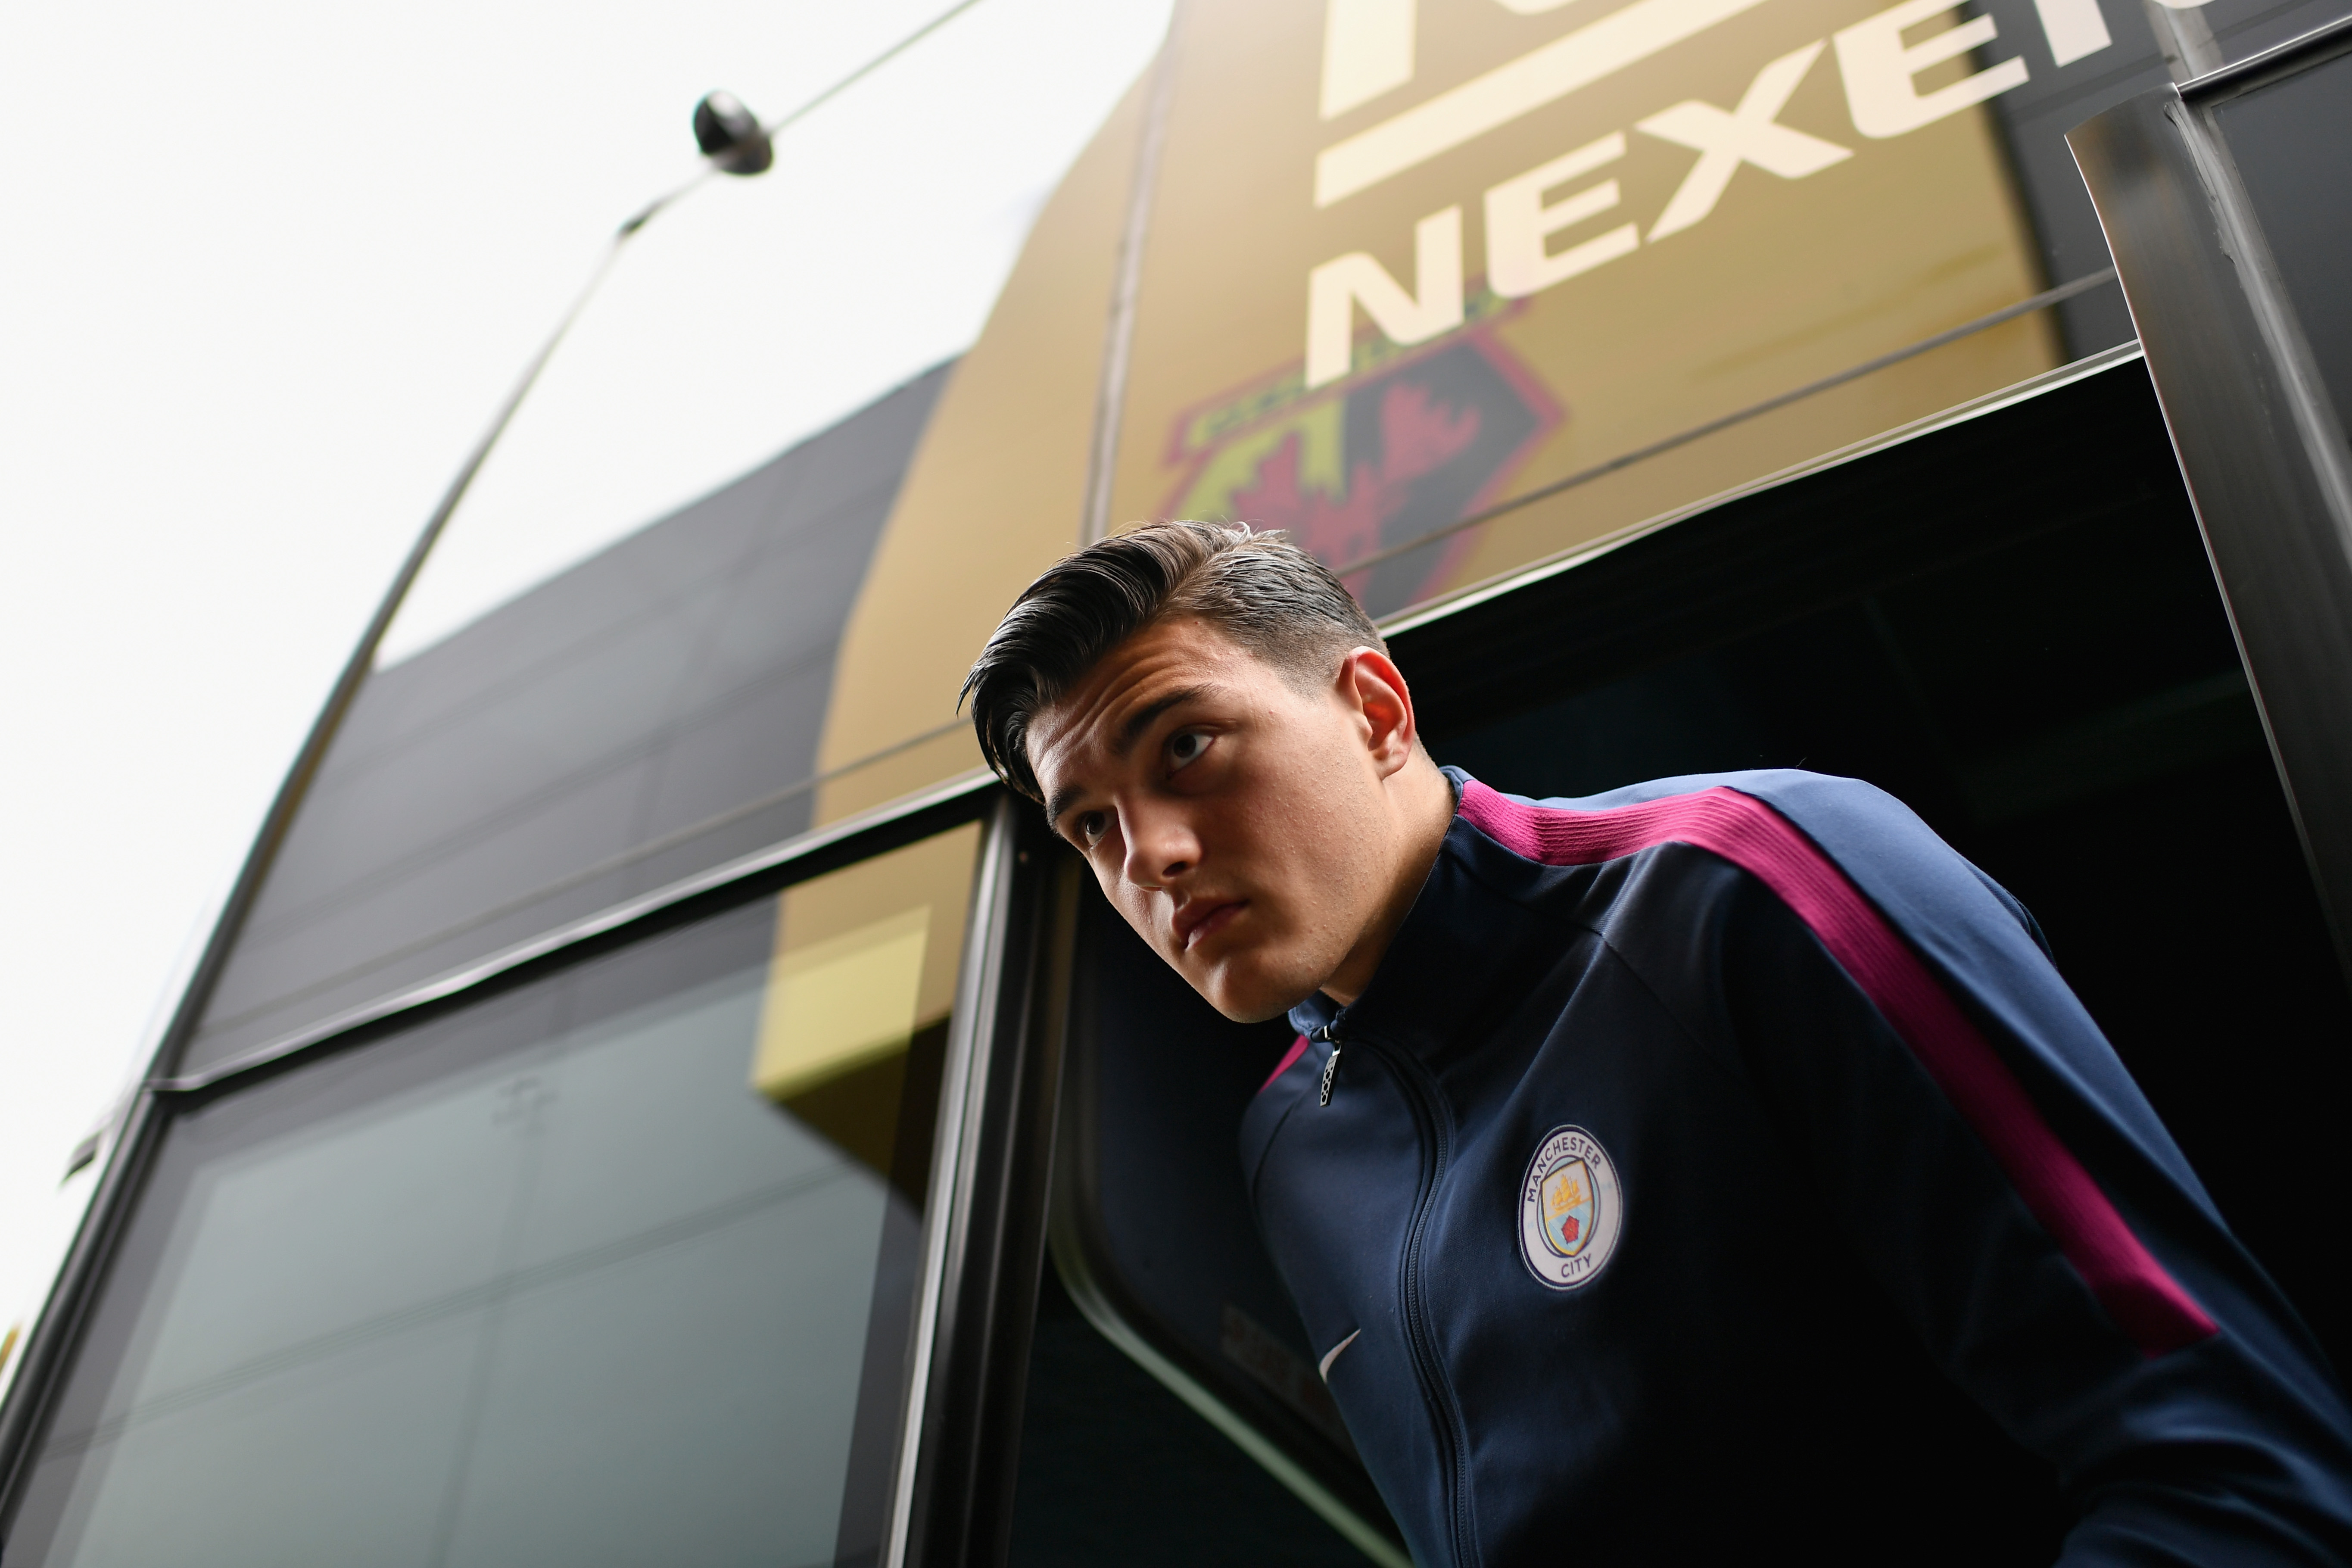 WATFORD, ENGLAND - SEPTEMBER 16: Brahim Diaz of Manchester City arrives at the stadium prior to the Premier League match between Watford and Manchester City at Vicarage Road on September 16, 2017 in Watford, England.  (Photo by Dan Mullan/Getty Images)